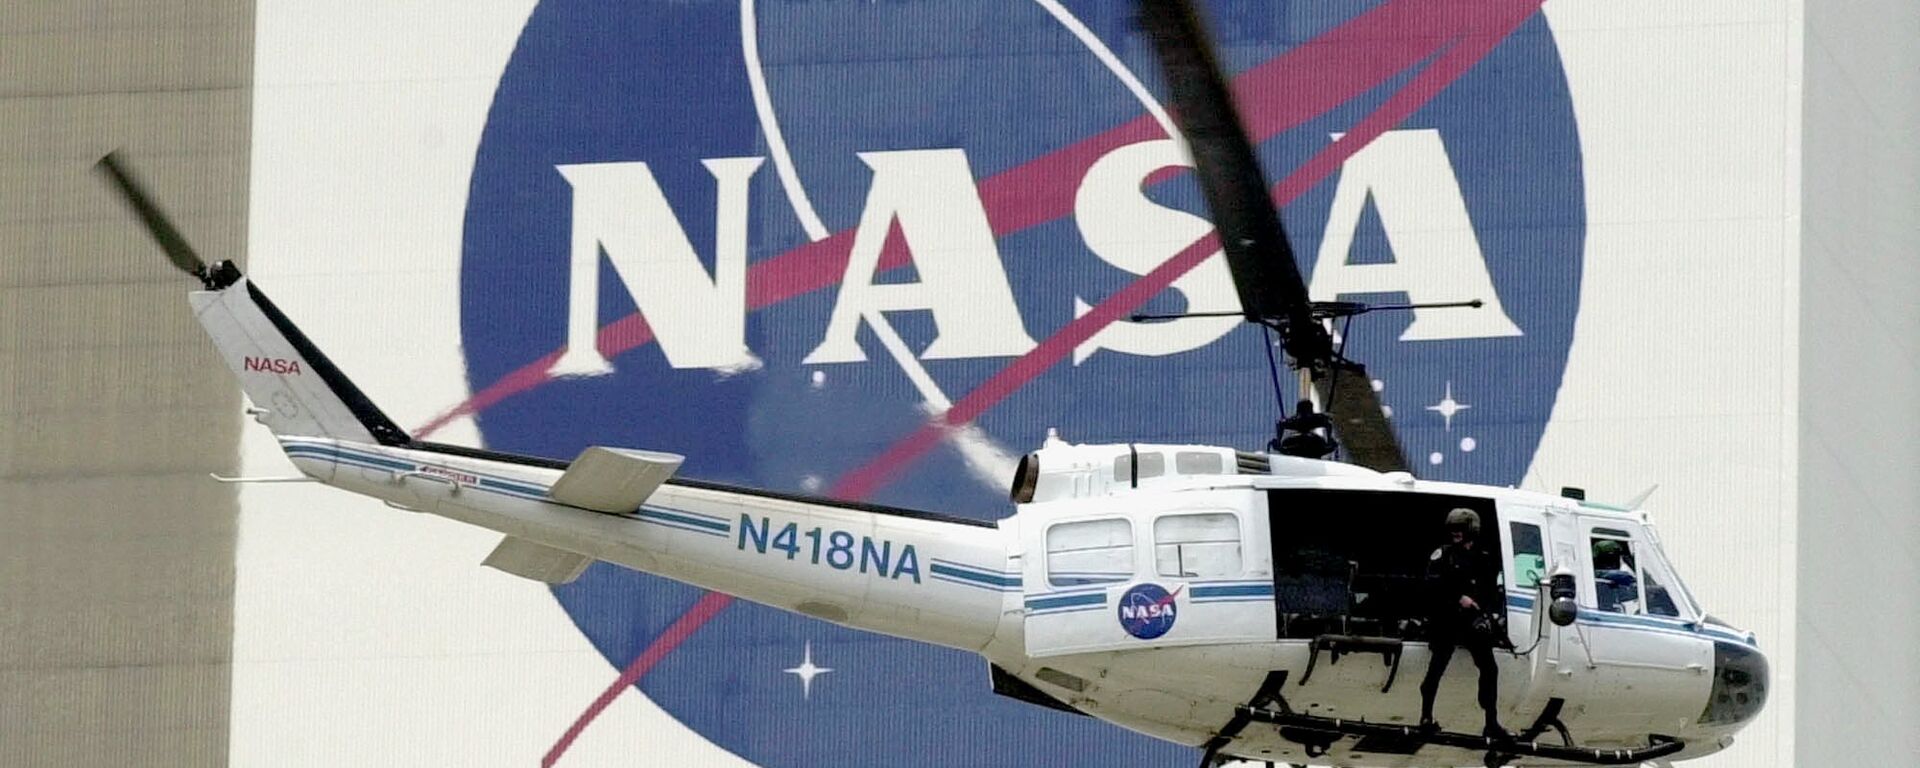 A NASA security helicopter flies by the NASA logo on the Vehicle Assembly Building - Sputnik International, 1920, 22.06.2017